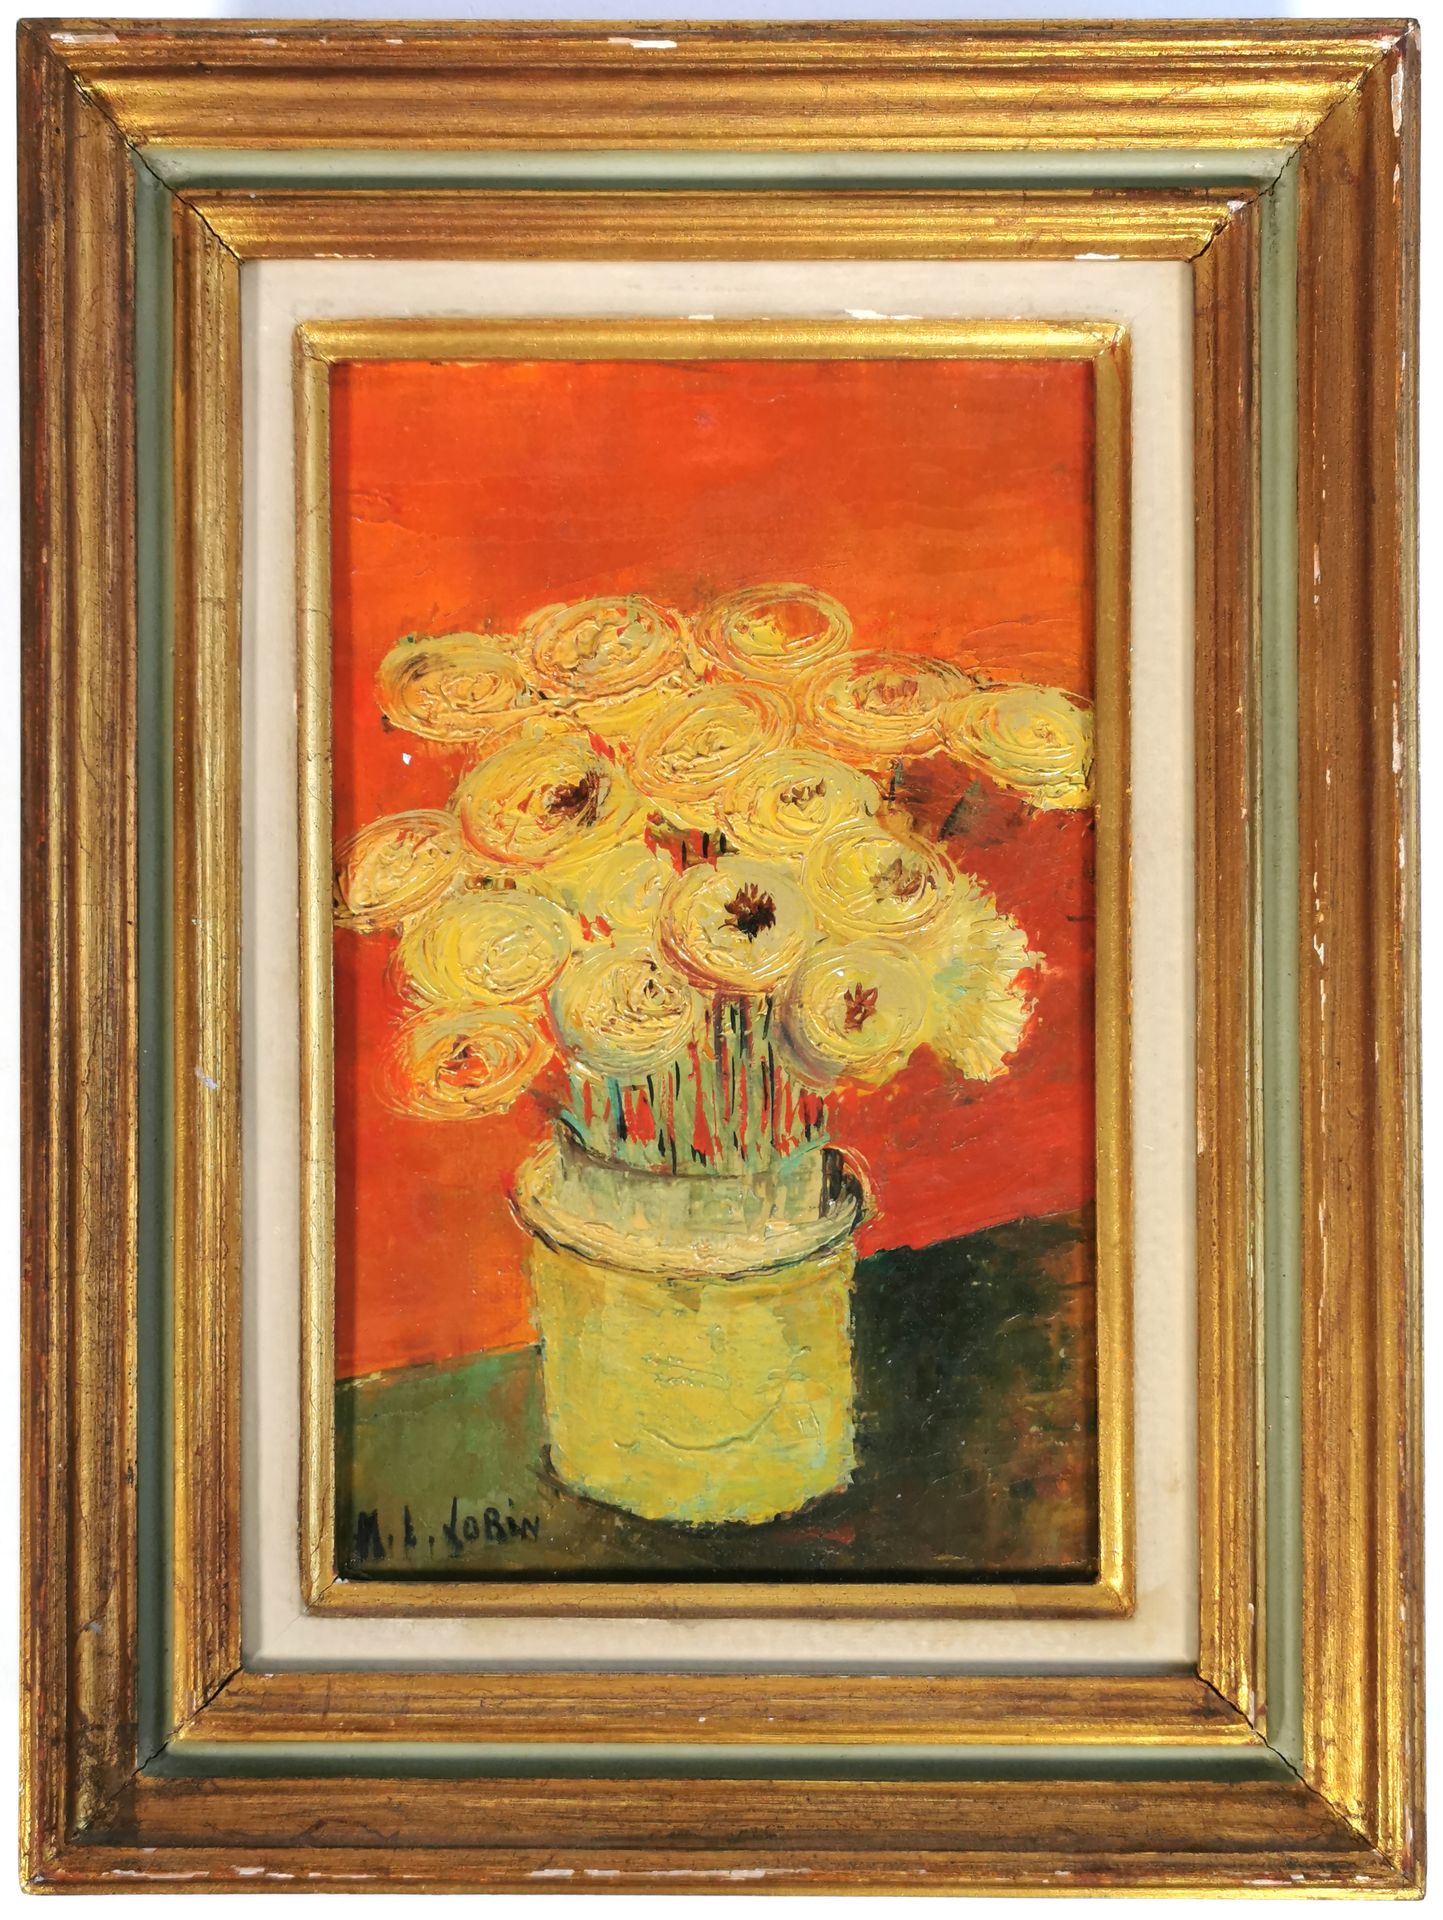 Null M. L. LORIN (20th century school)

Bunch of flowers

Oil on canvas signed

&hellip;